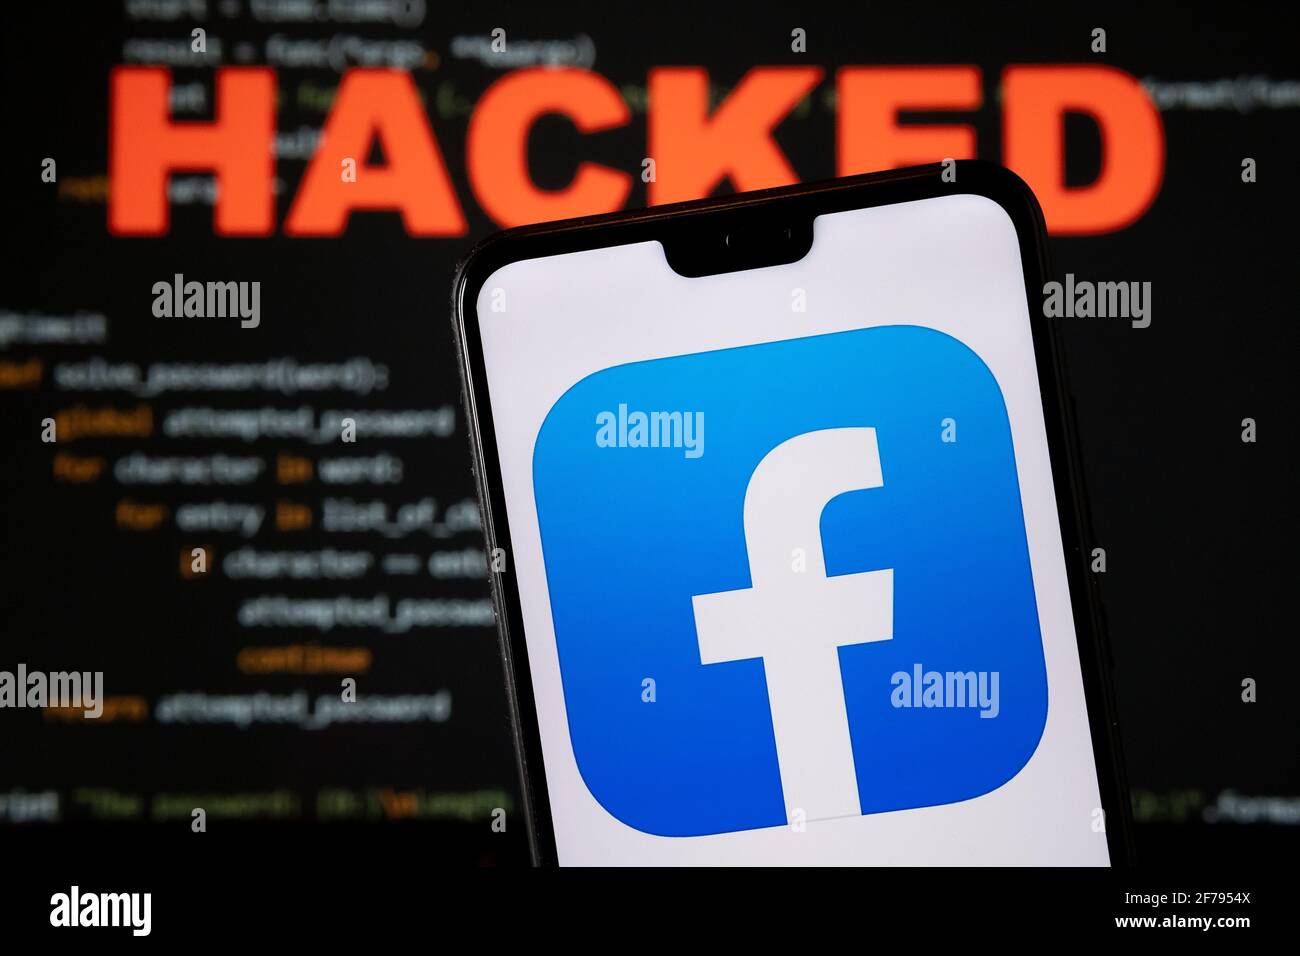 Facebook app logo seen on the smartphone and blurred HACKED word with a brute force script on the blurred background. Concept for facebook data breach Stock Photo